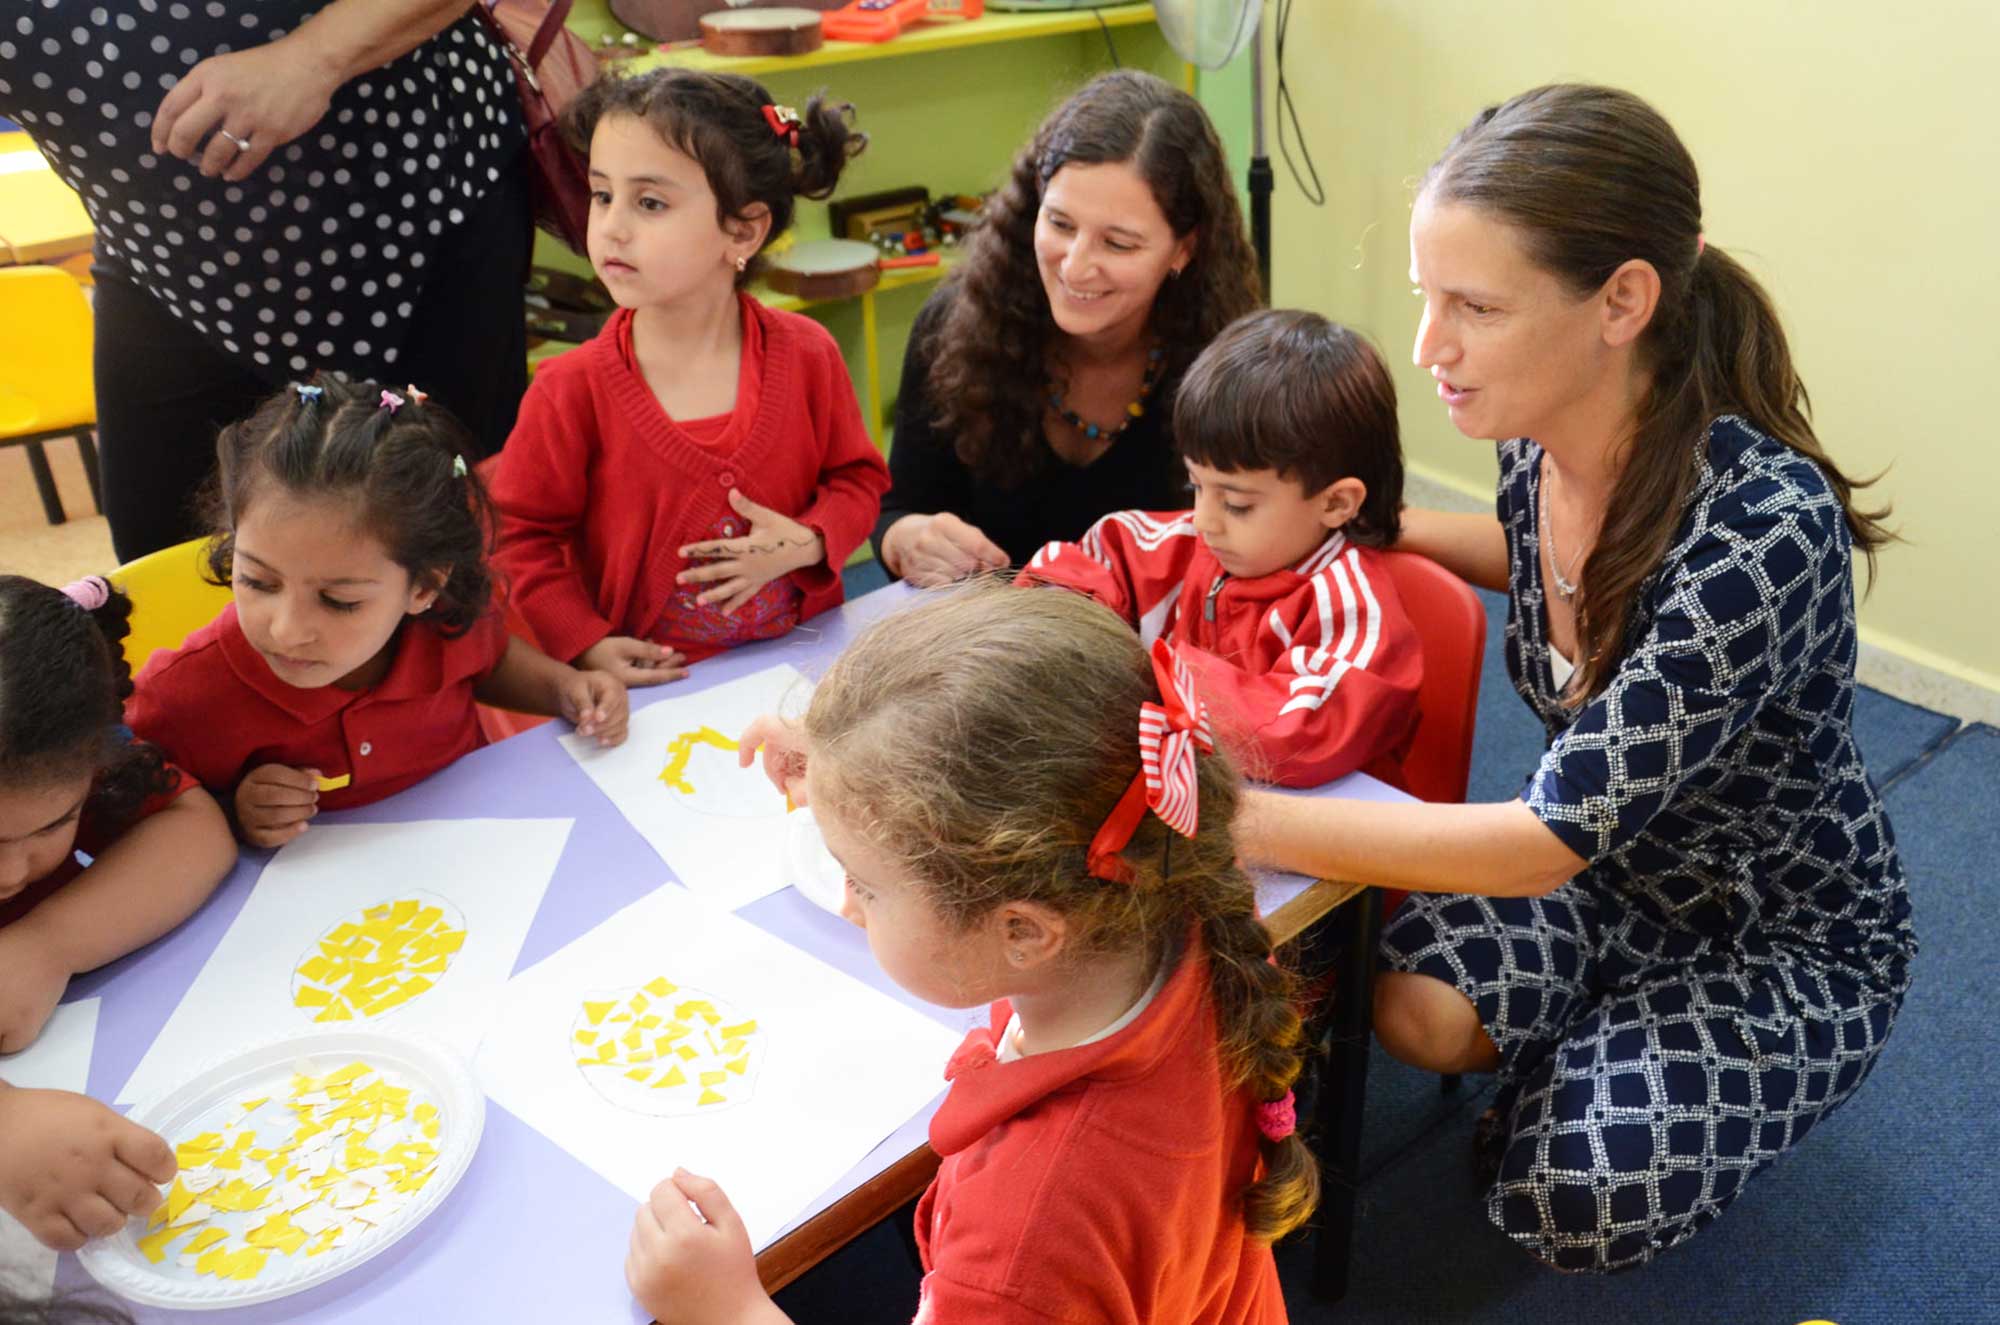 The Gubser sisters help the Al Tireh preschoolers with their arts and crafts project.